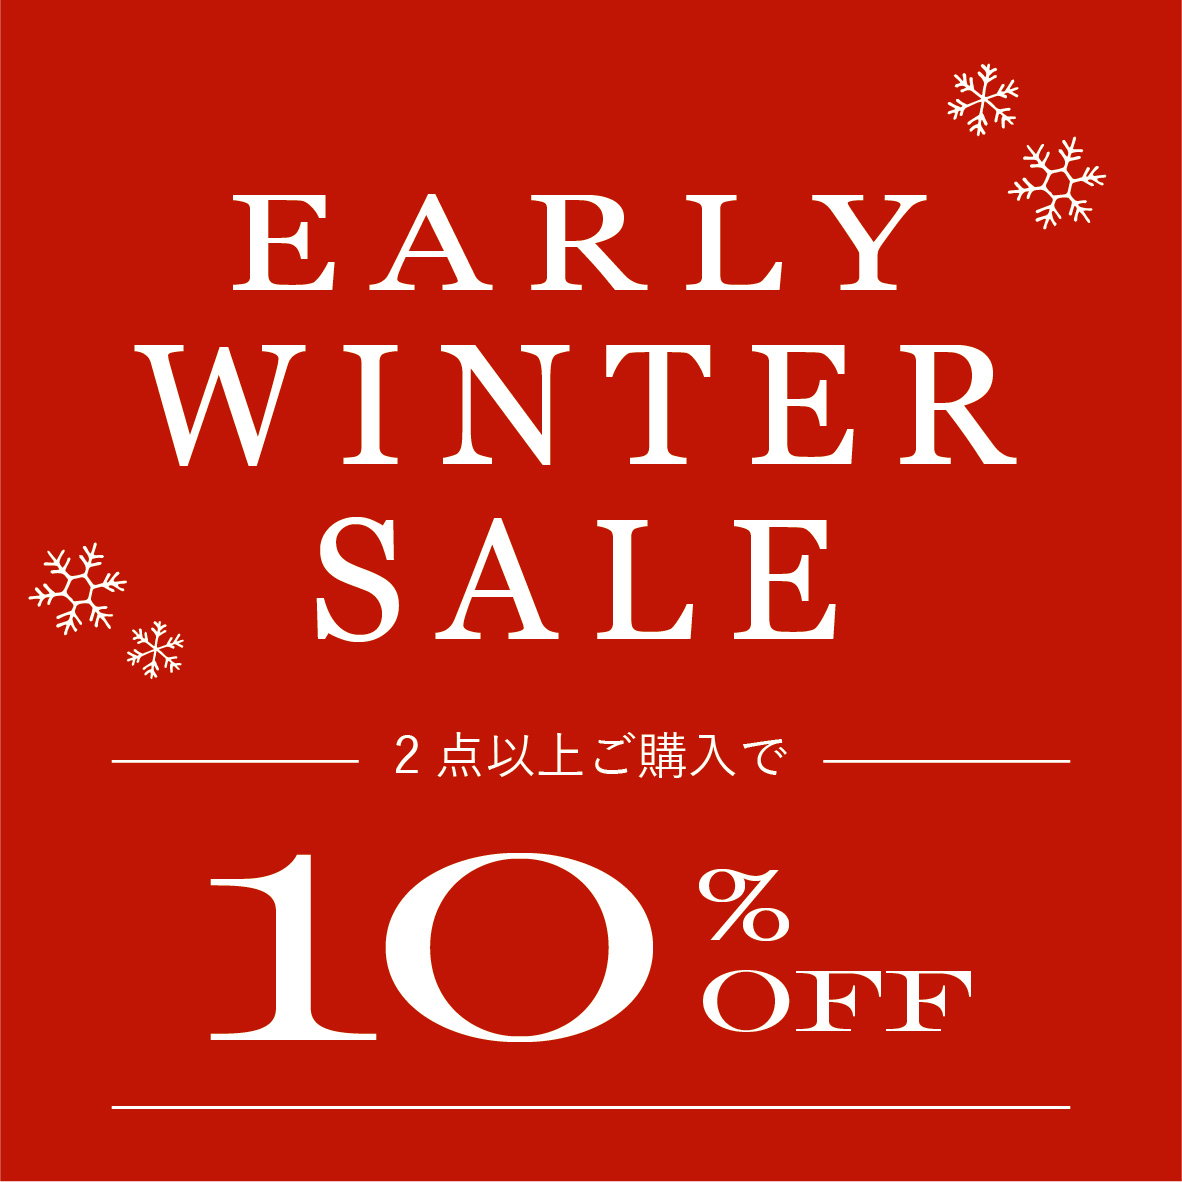 【ROOMDECO 柏本店】EARLY WINTER SALEを開催！